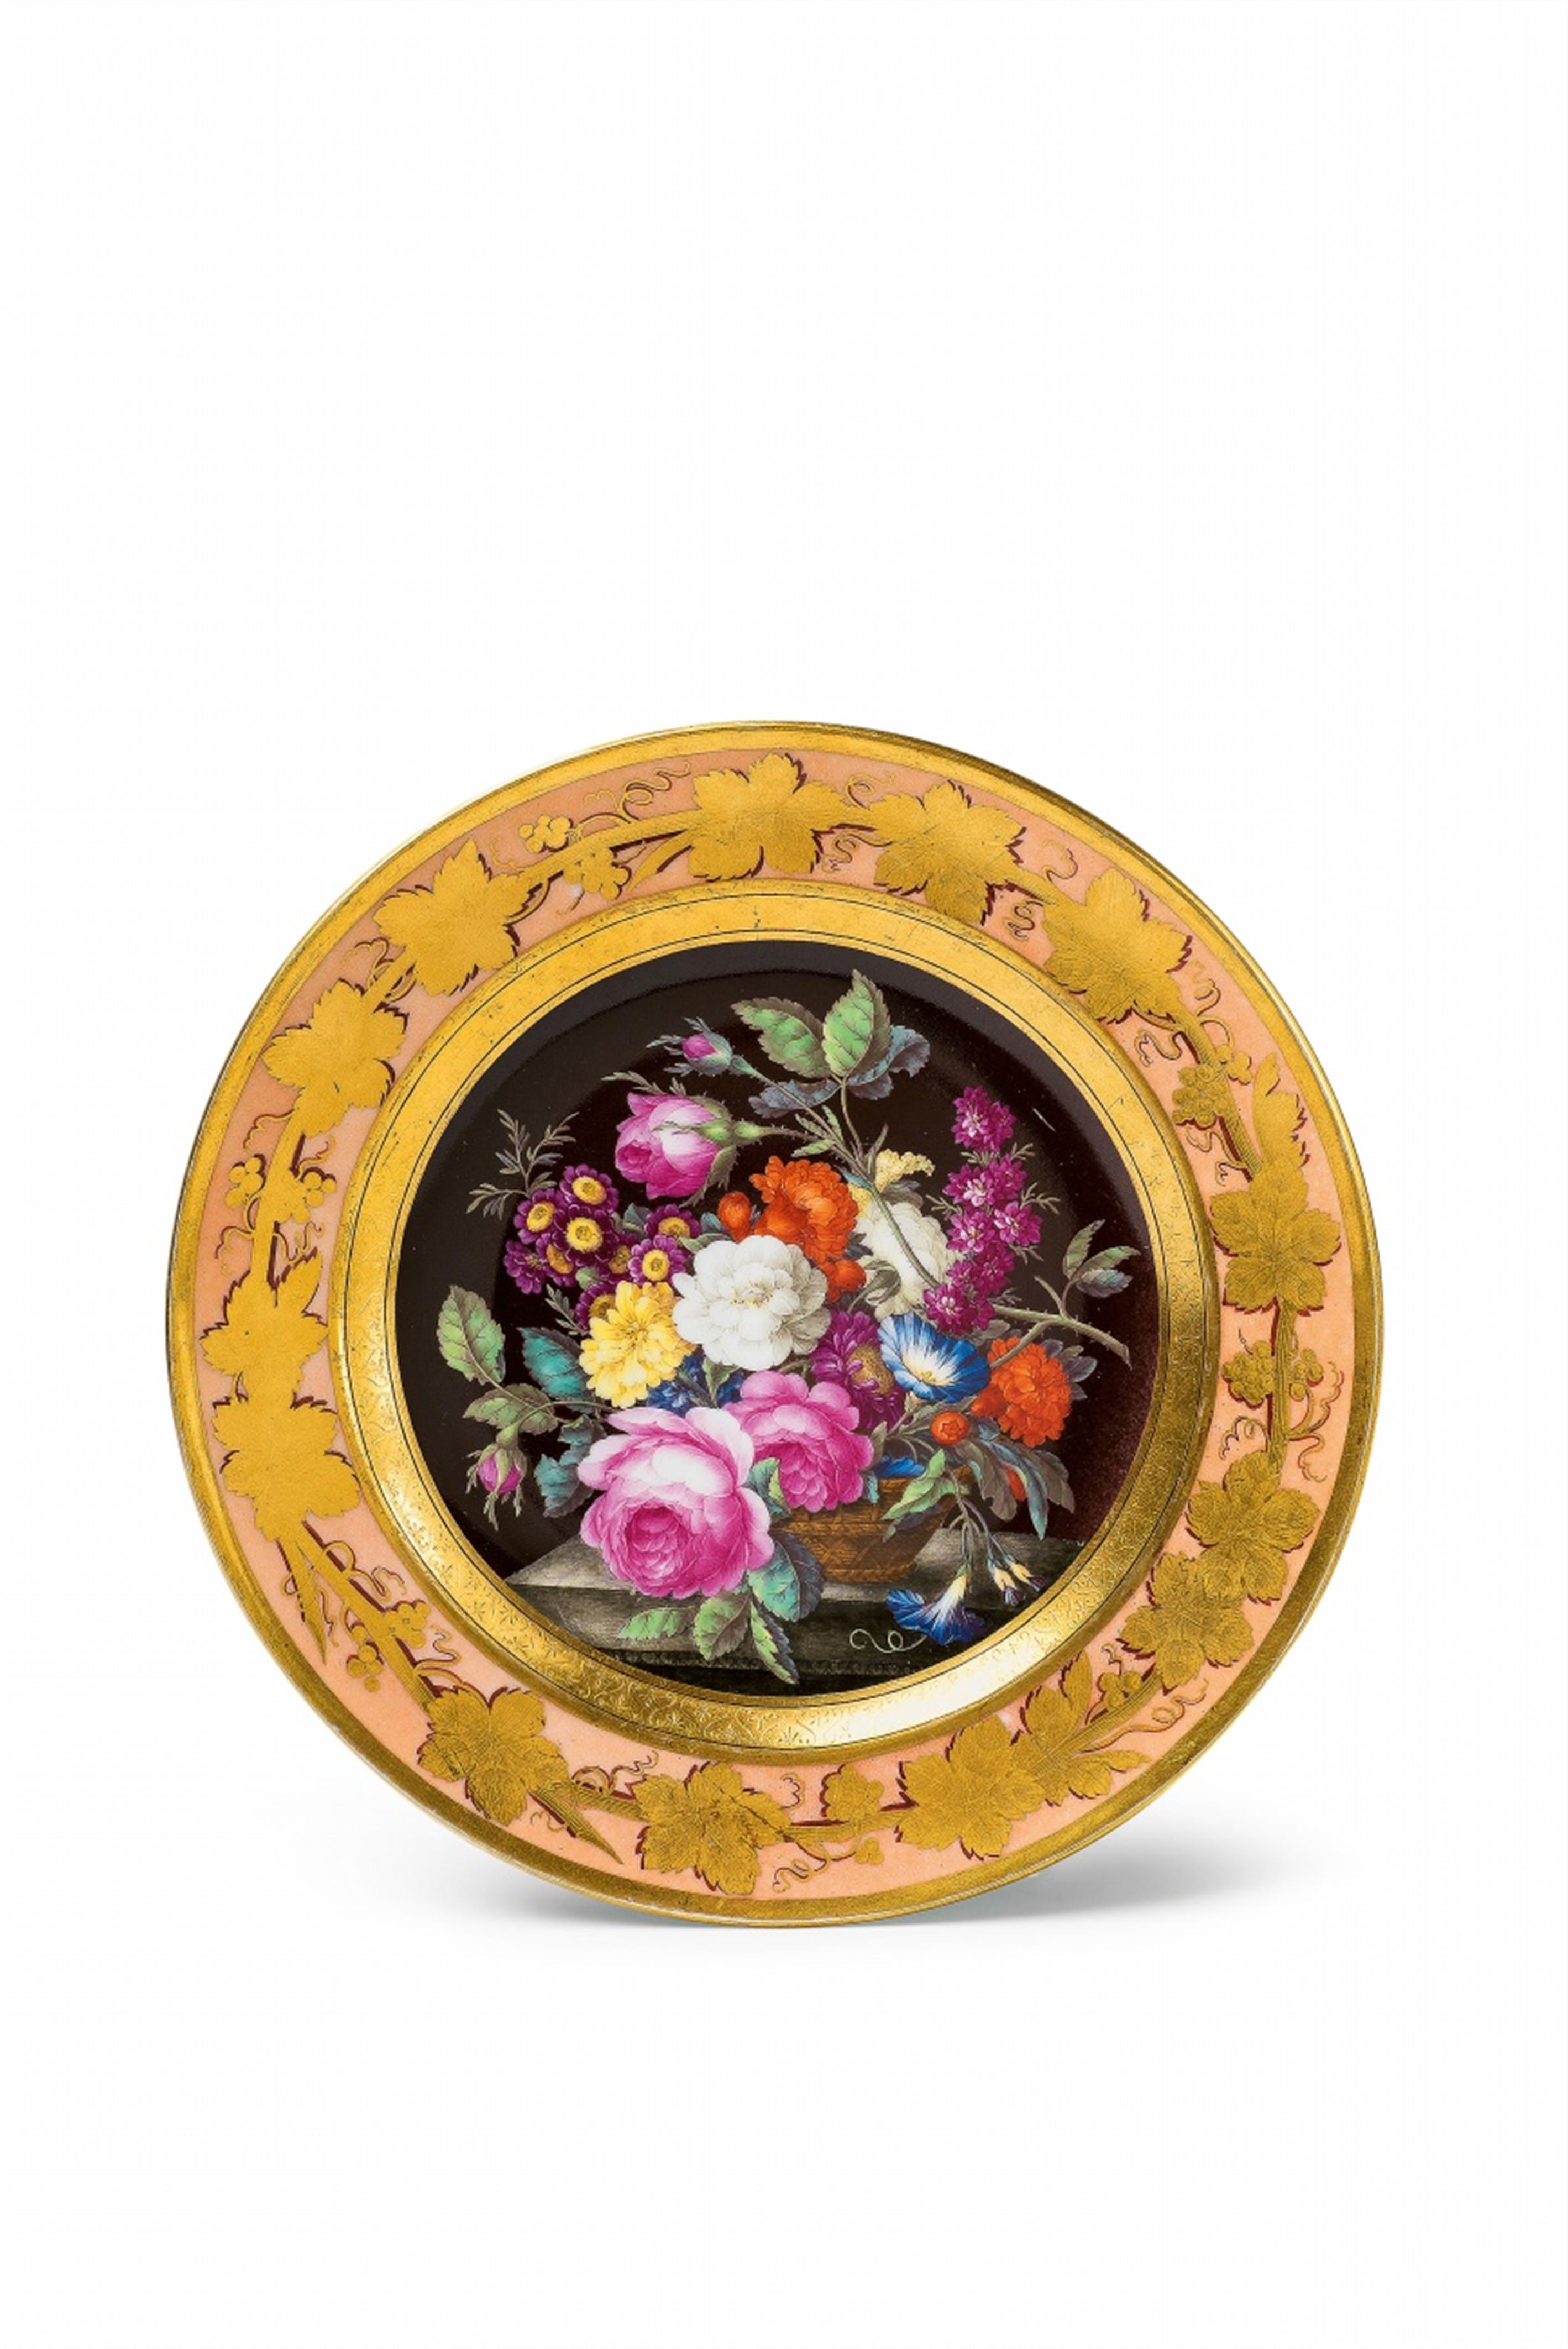 A Berlin KPM porcelain plate with a basket of flowers - image-1